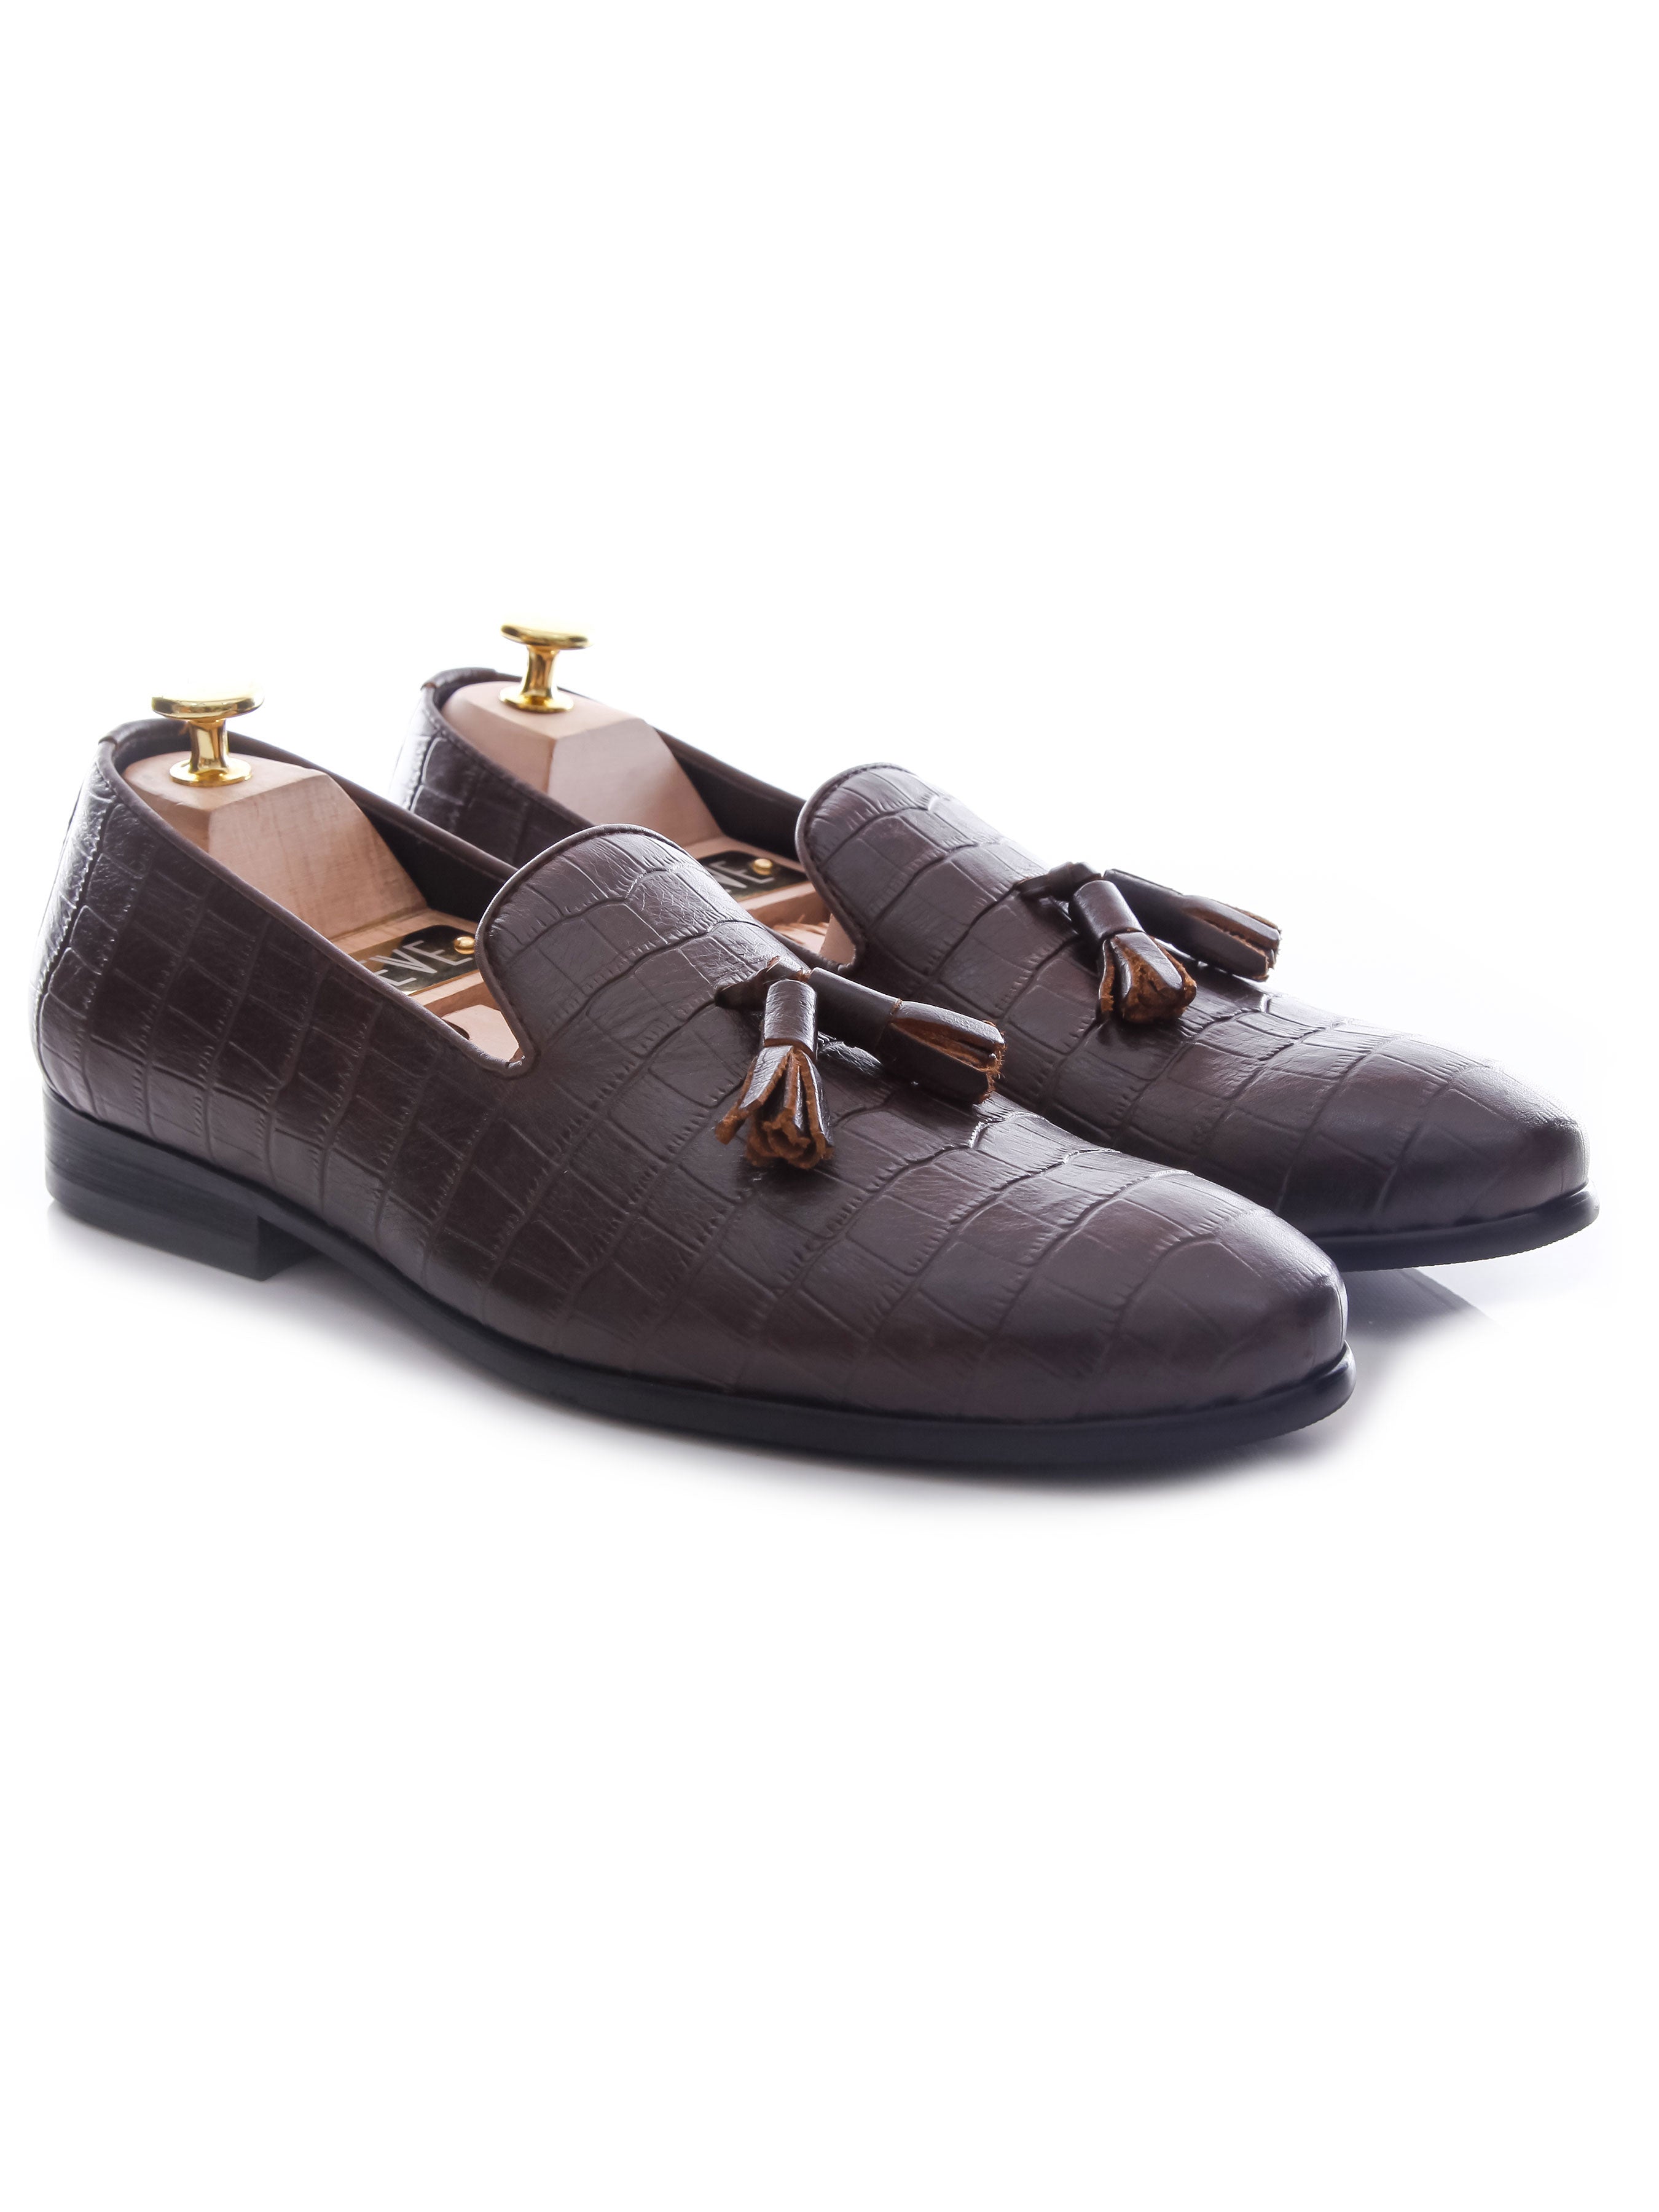 Loafer Slipper - Coffee Croco Leather - Zeve Shoes